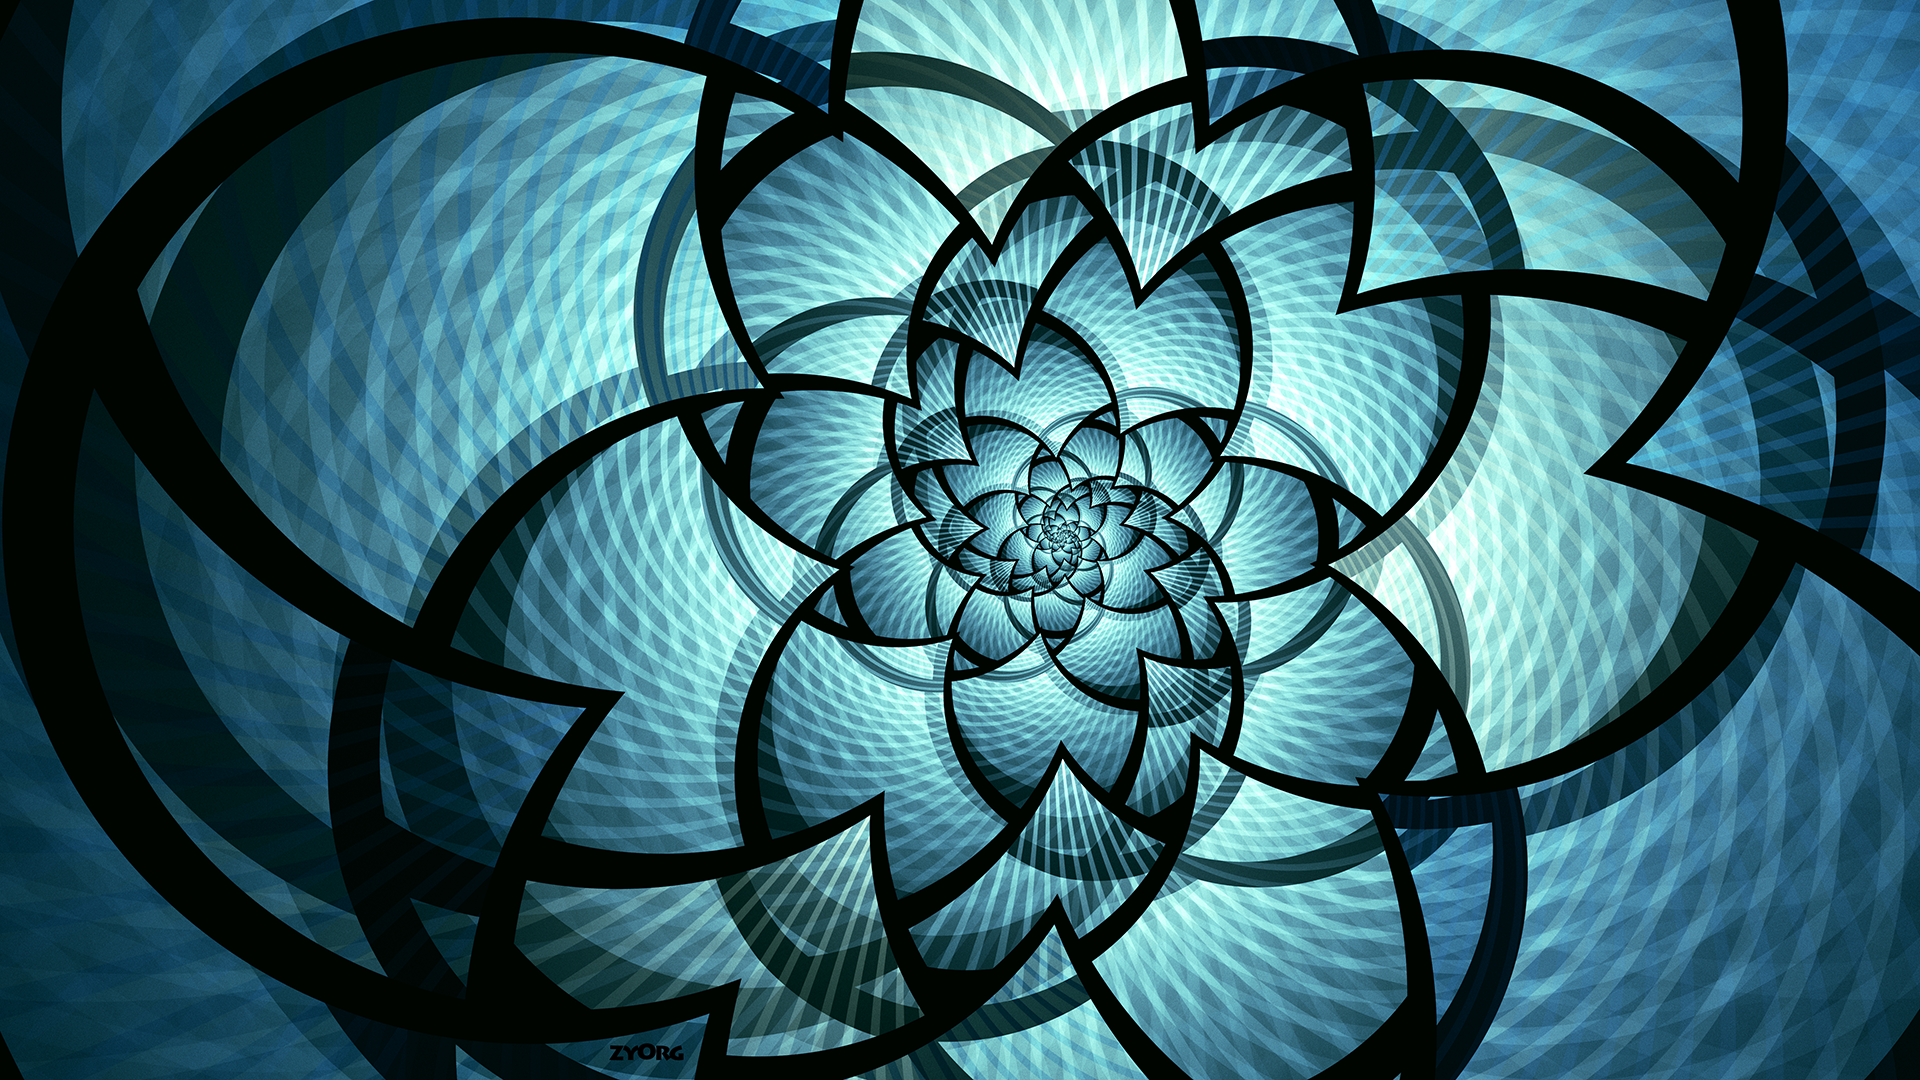 Abstract Fractal Wallpapers | Abstract Fractal Backgrounds and ...